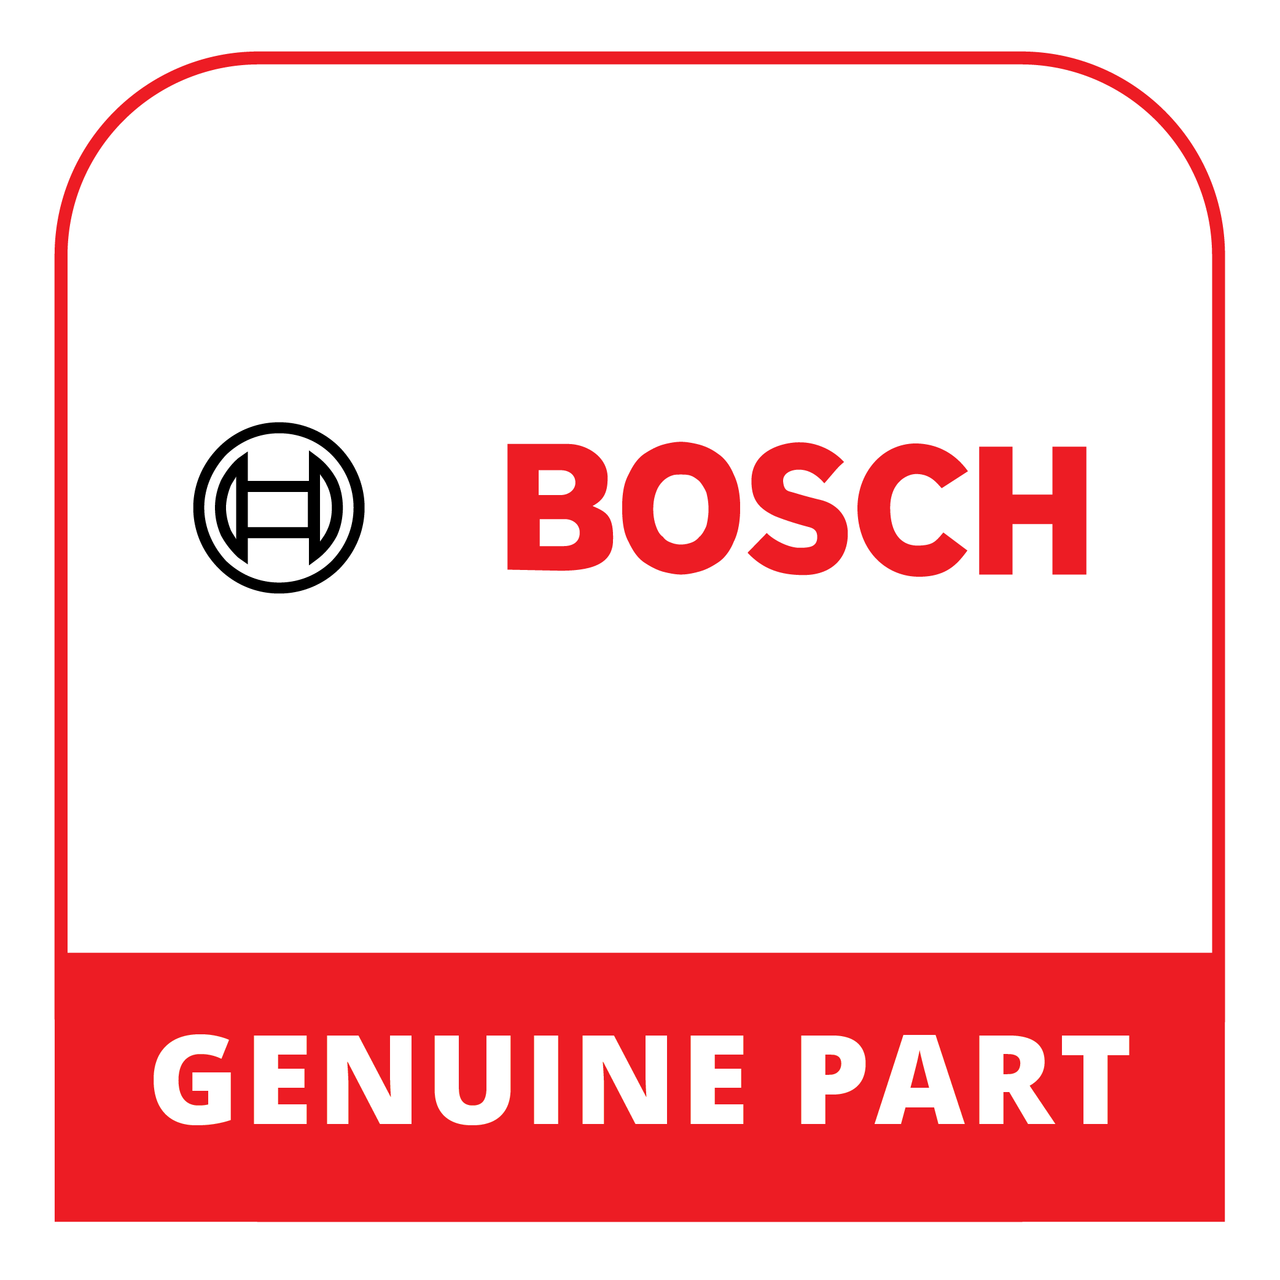 Bosch (Thermador) 10004421 - Connection Piece - Genuine Bosch (Thermador) Part